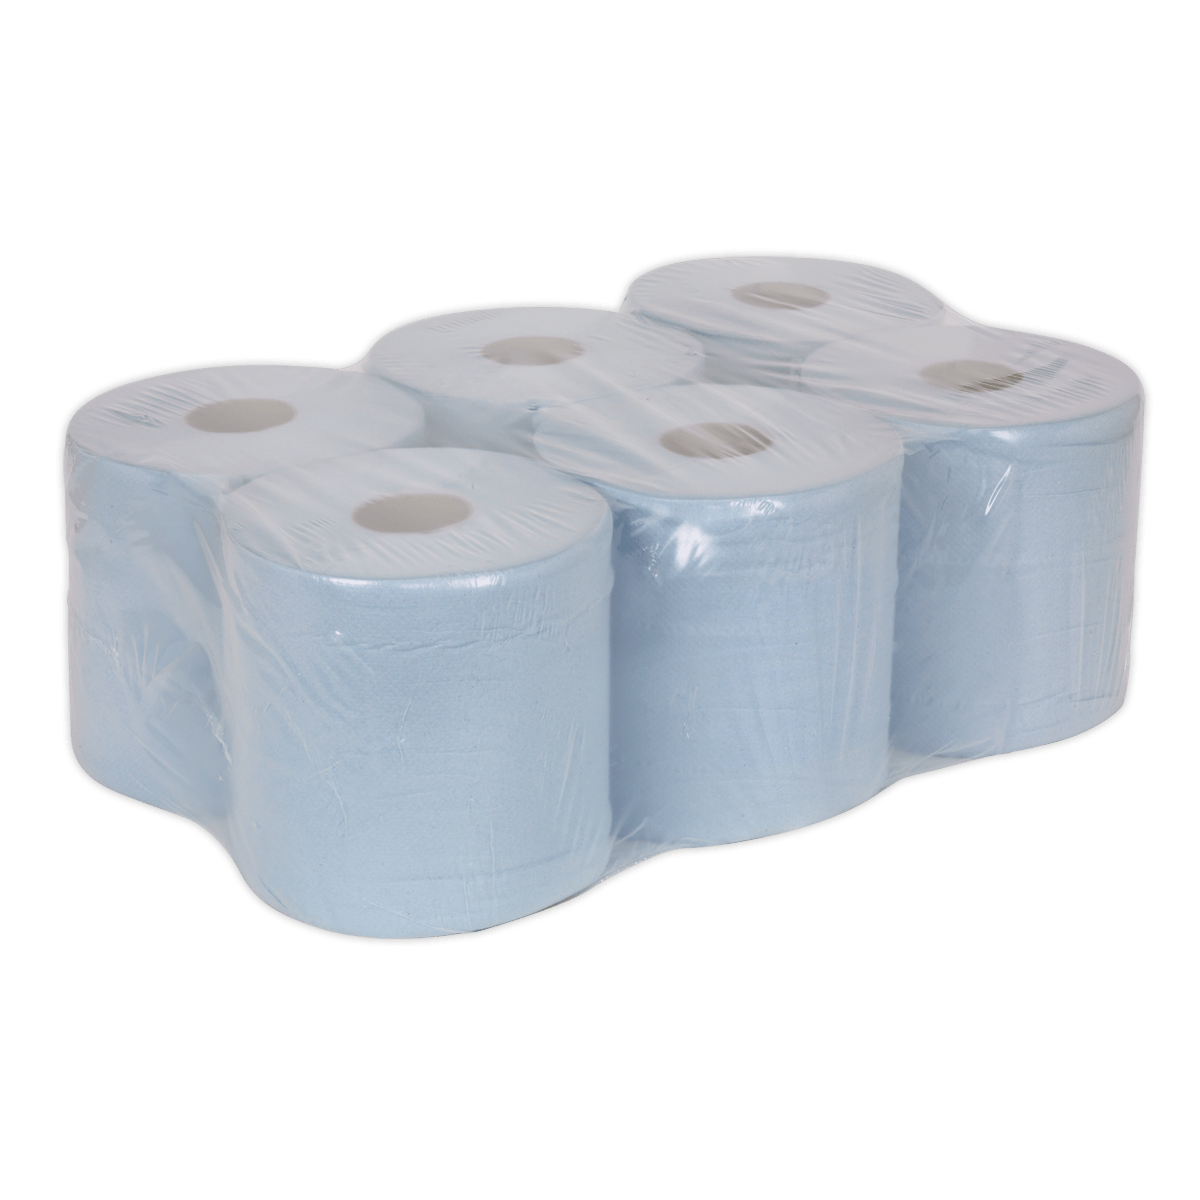 Sealey Paper Roll Blue 2-Ply Embossed 150m Pack of 6 BLU150